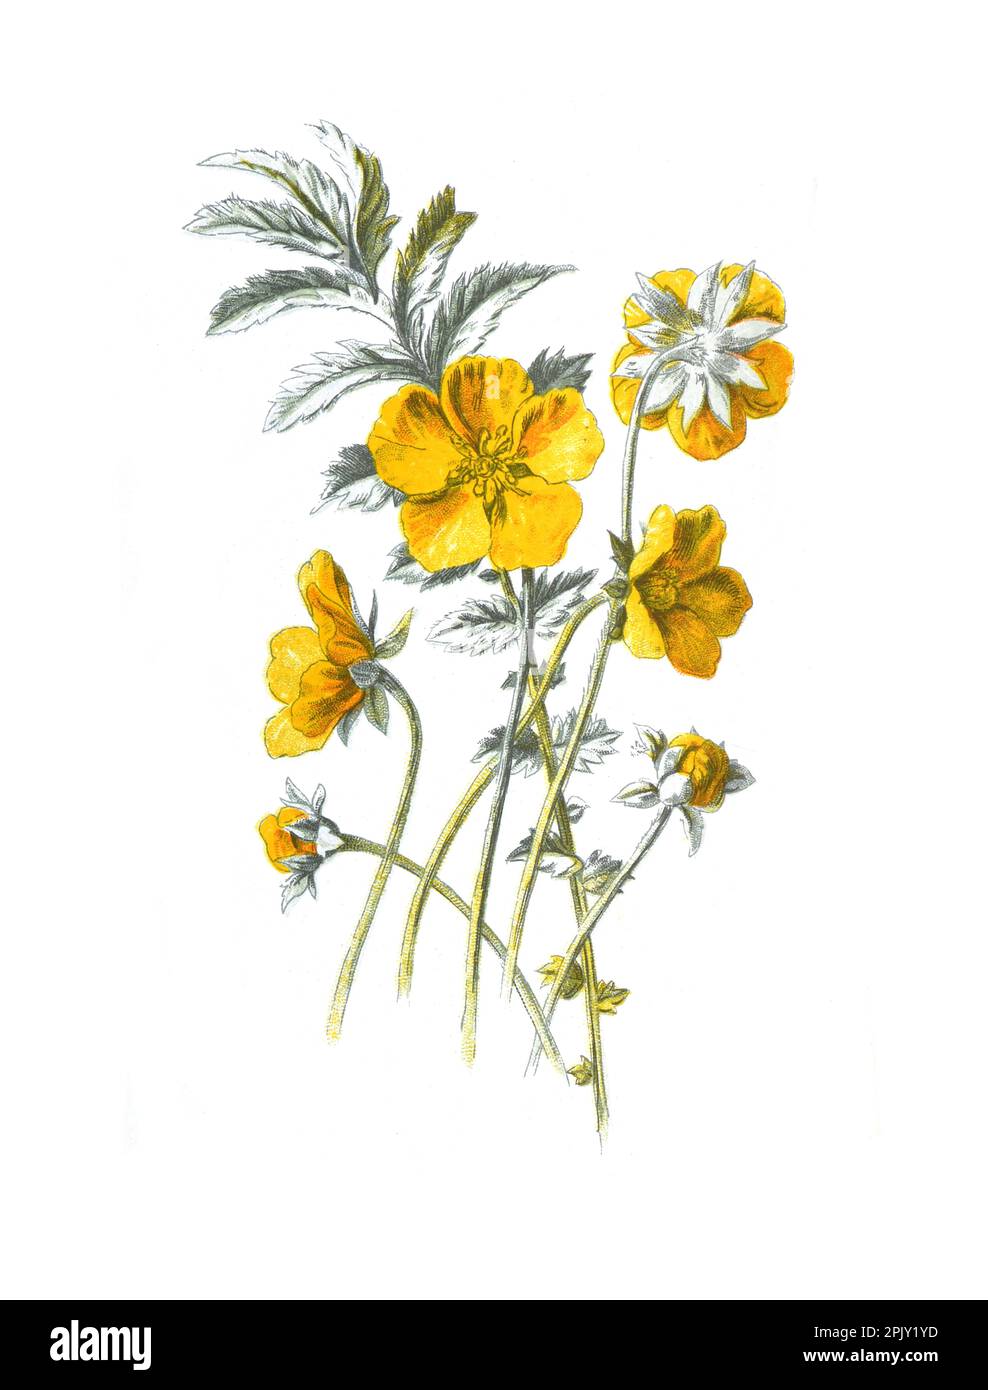 Argentina anserina or common Silverweed flower. (Potentilla anserina) hand drawn flowers illustration. Vintage and antique flowers. wild flower. Stock Photo